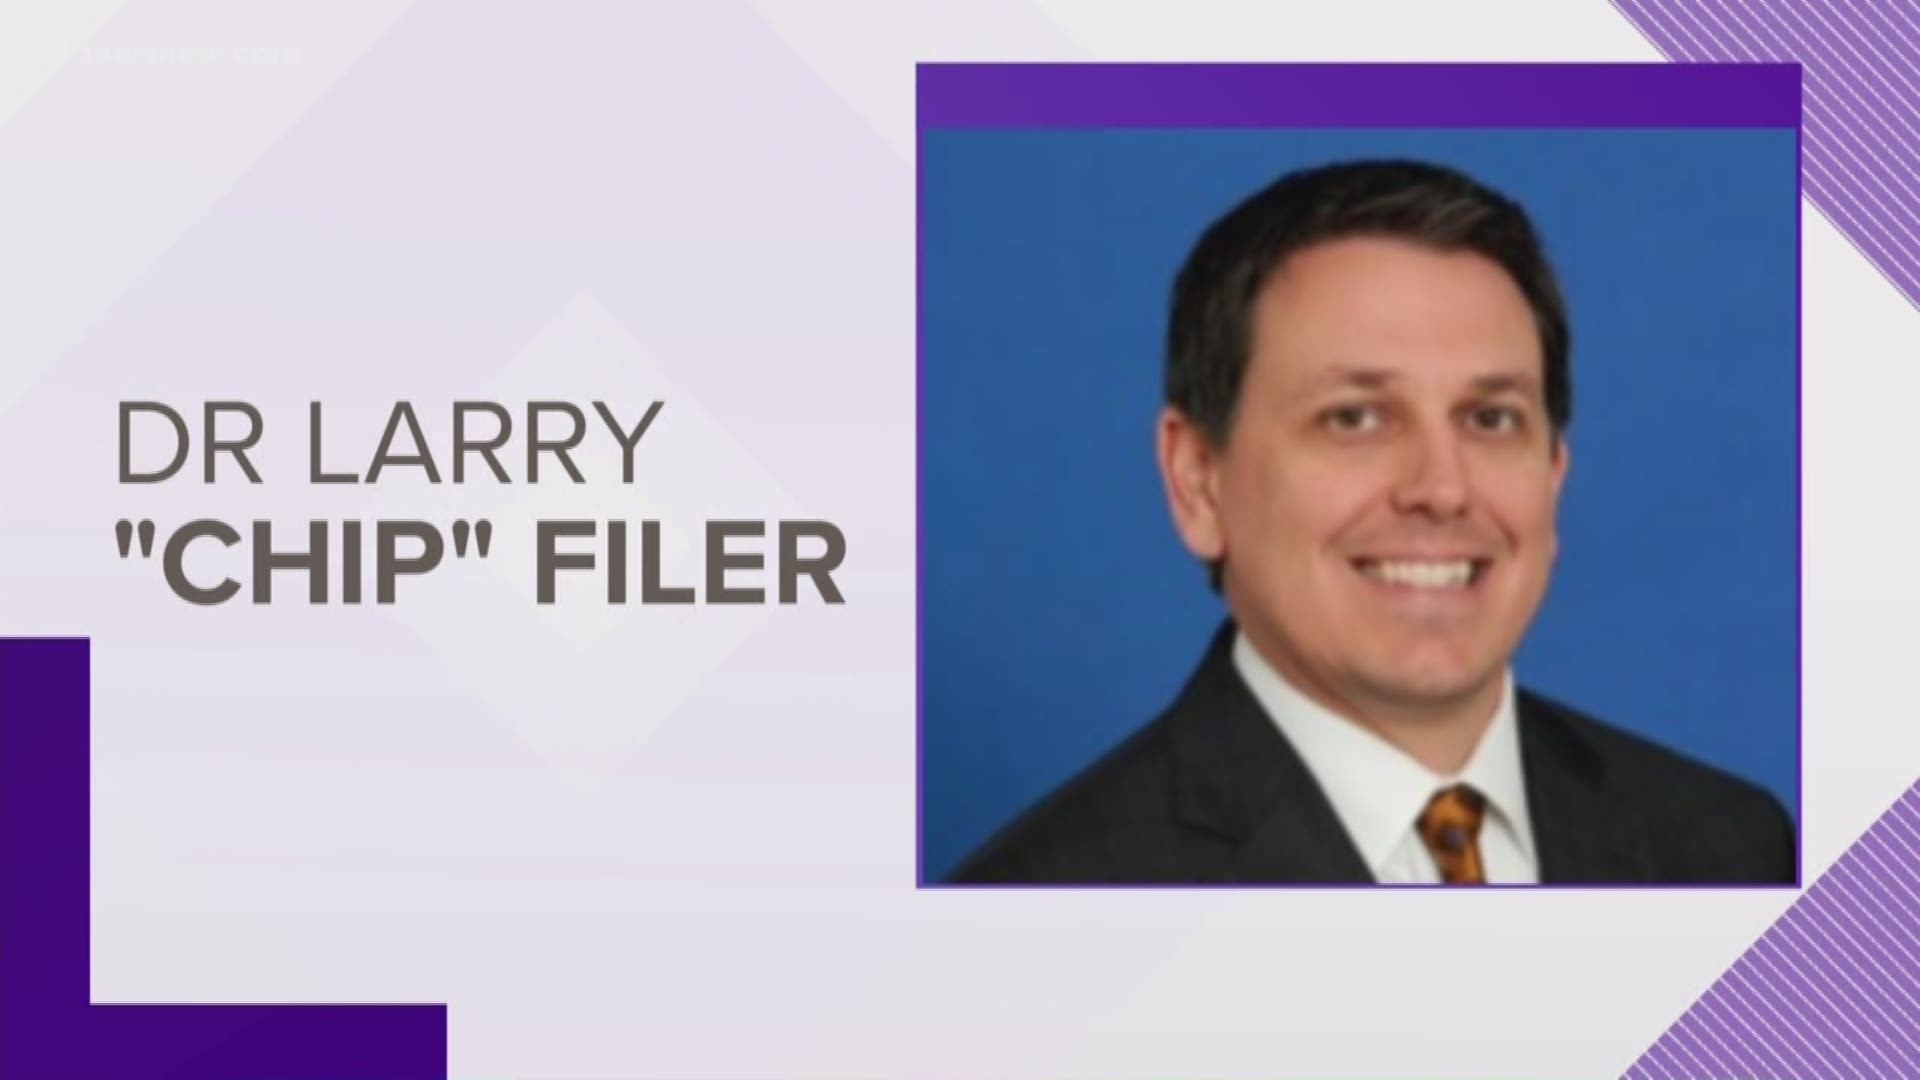 Dr. Larry "Chip" Filer will take over the position after the last one stepped down. Filer currently serves as the Associate Vice President for Entrepreneurship and Economic Development for Old Dominion University.